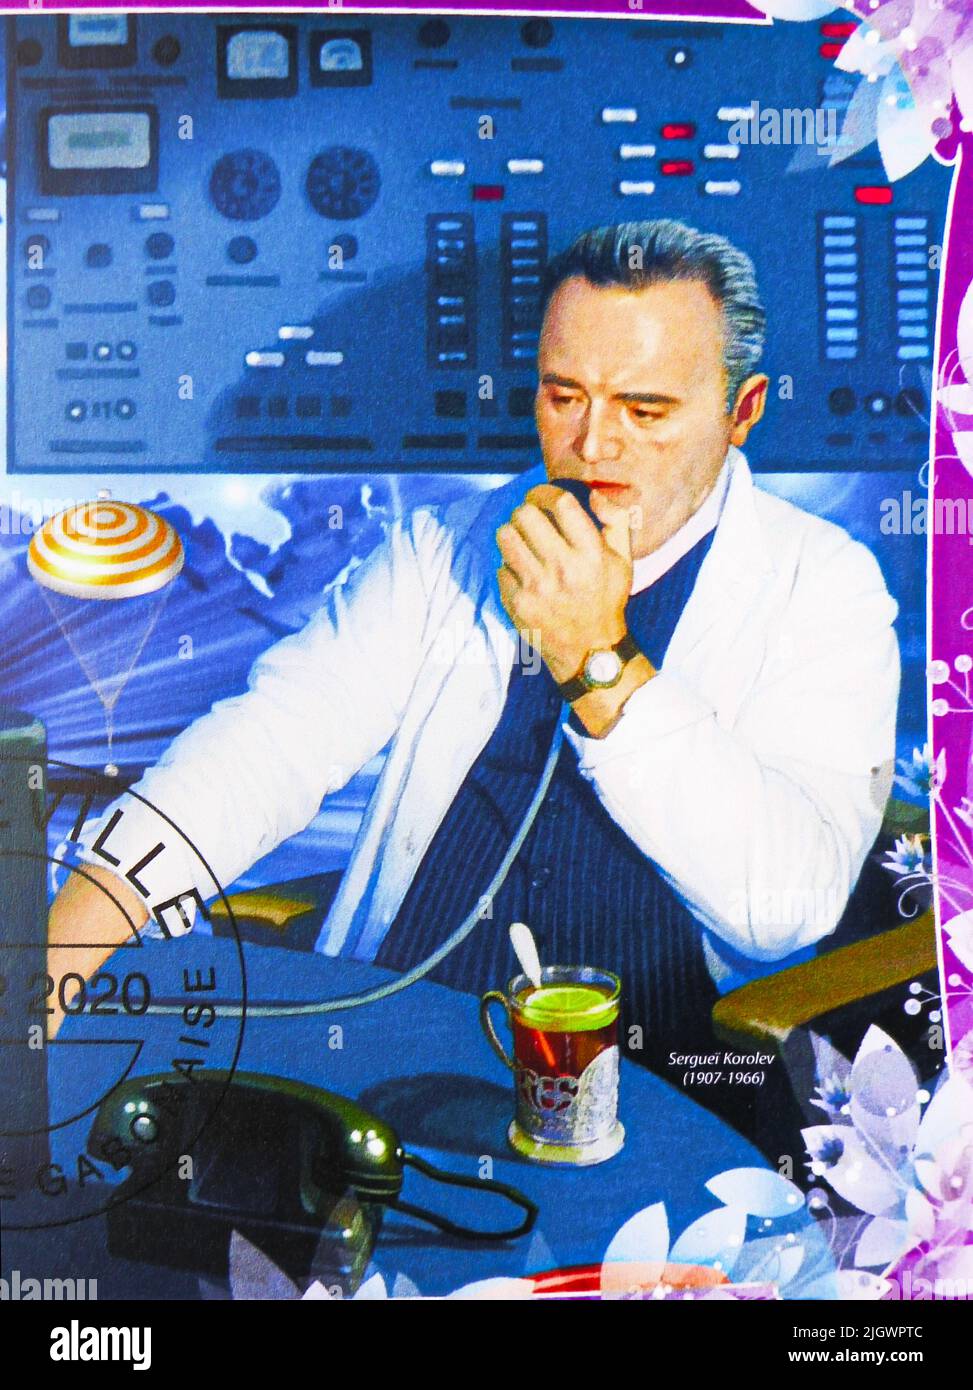 MOSCOW, RUSSIA - JUNE 17, 2022: Postage stamp printed in Gabon shows Sergei Korolev, Space programs serie, circa 2020 Stock Photo